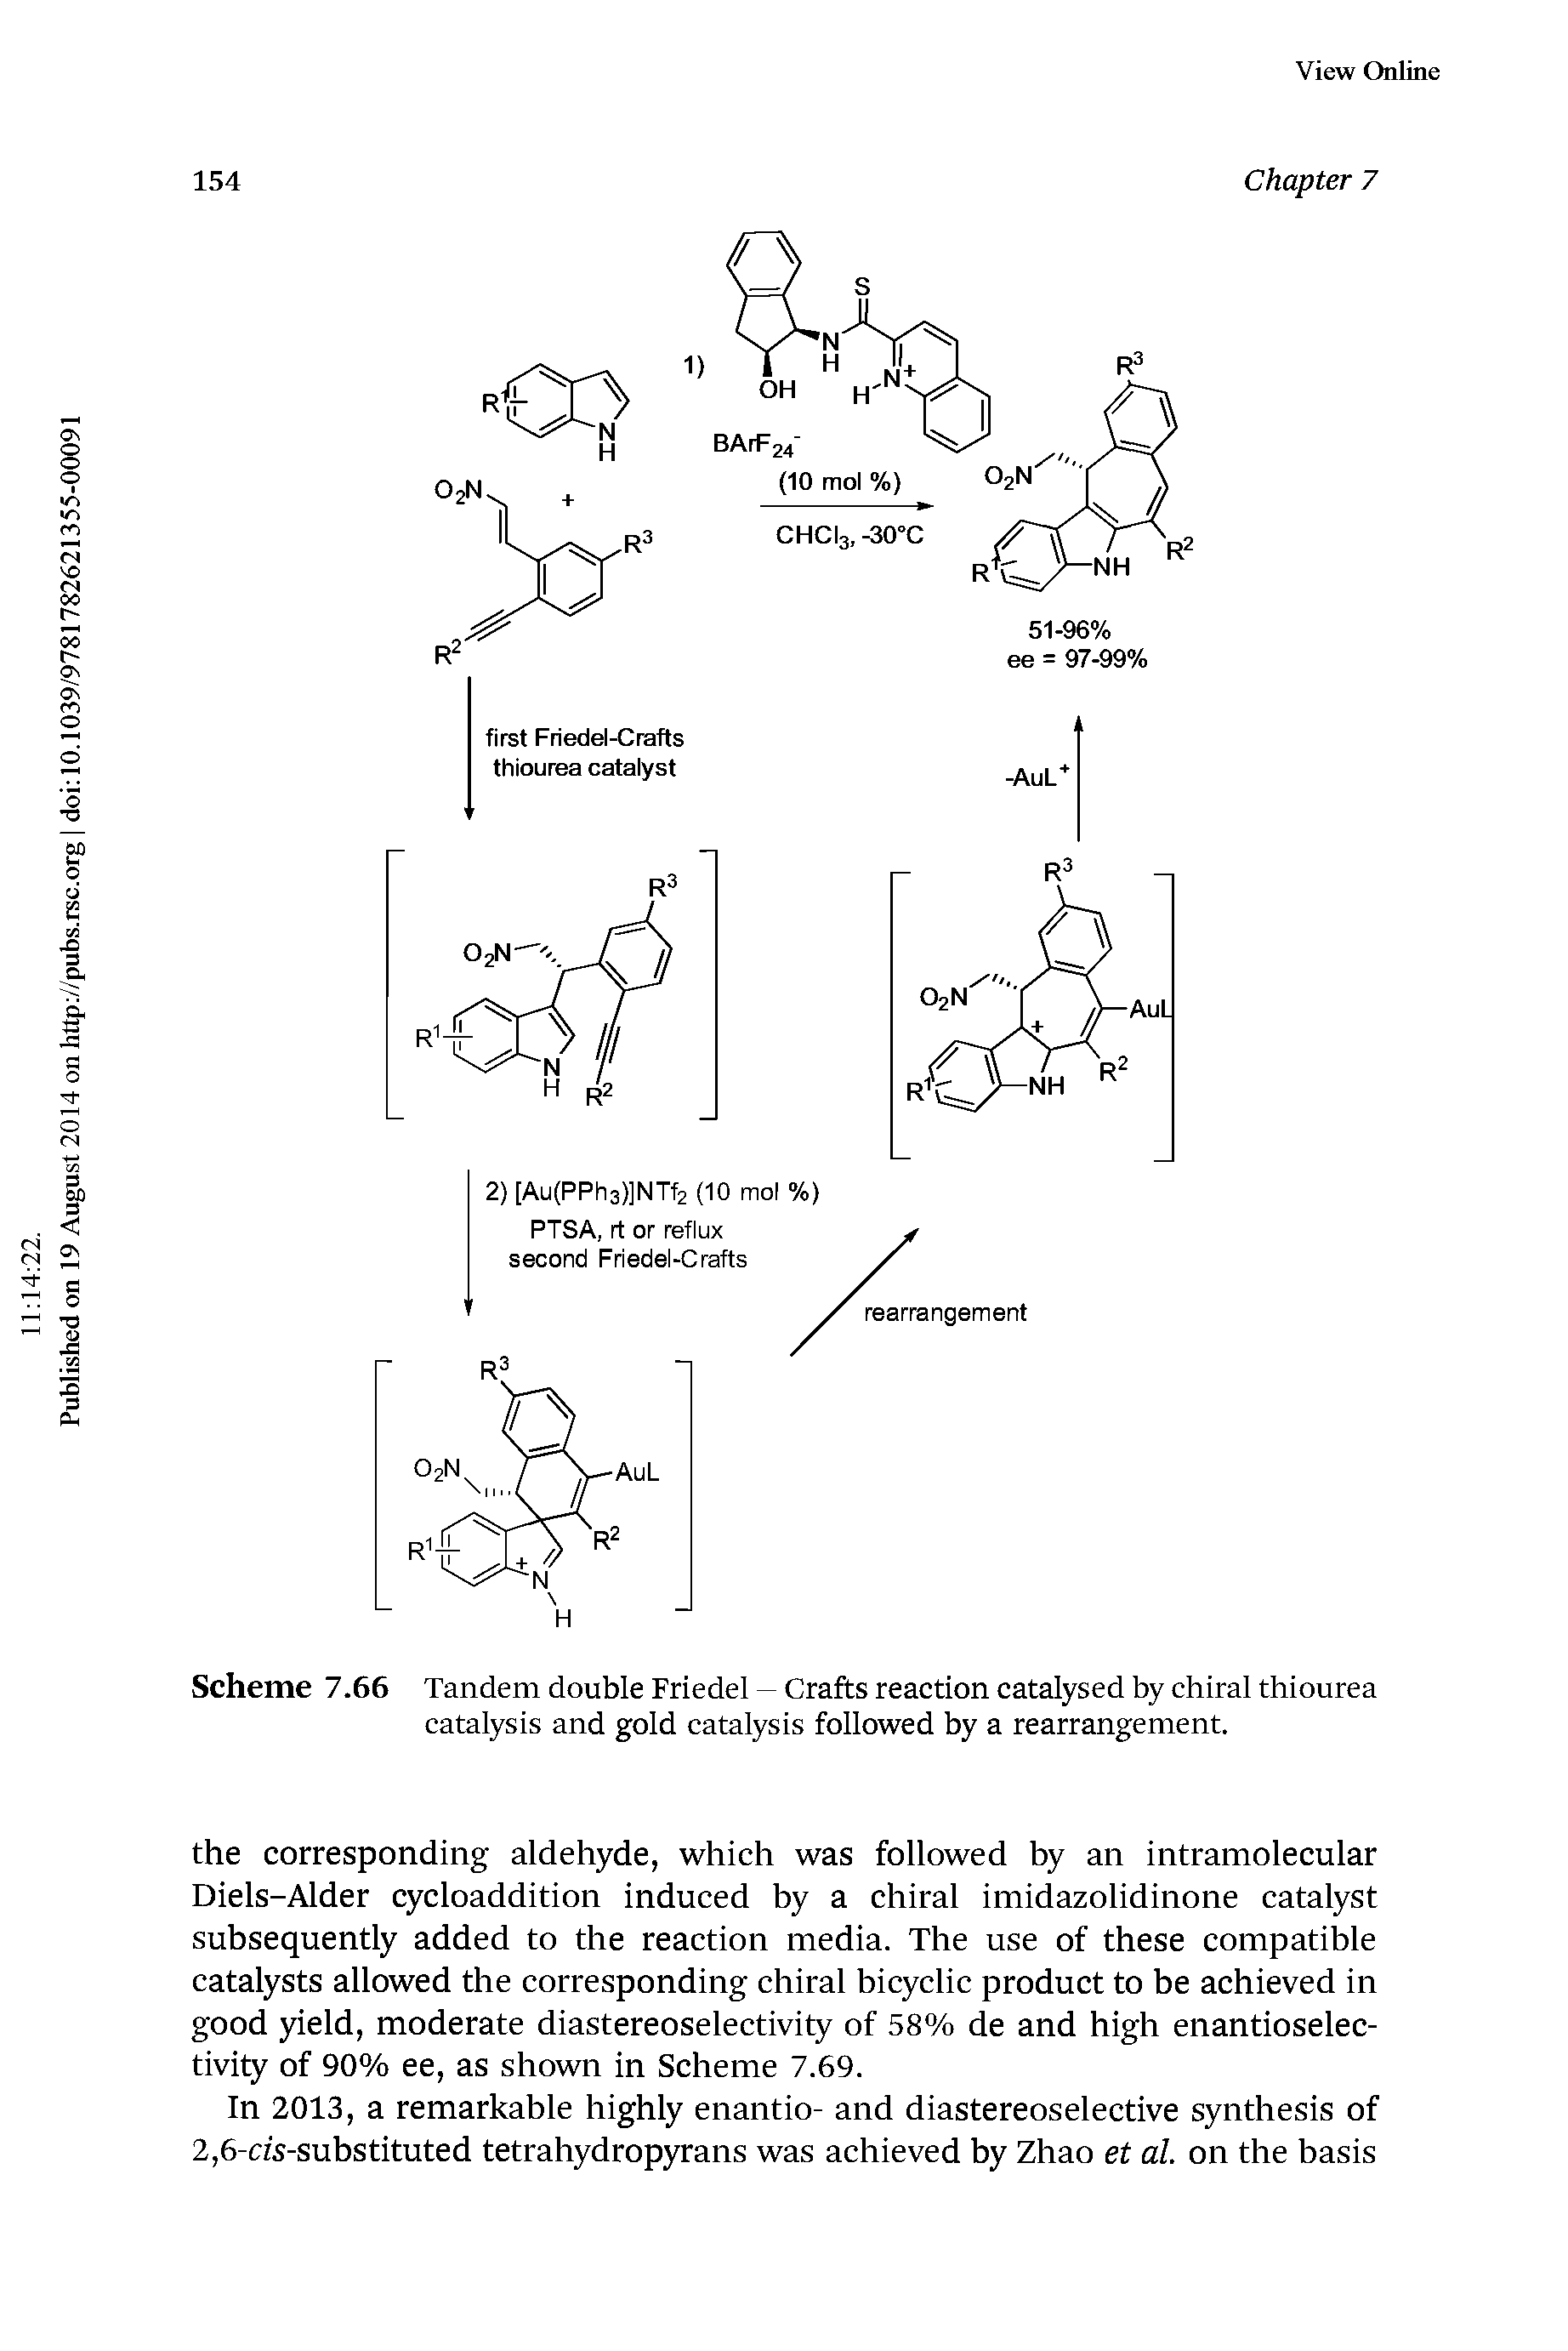 Scheme 7.66 Tandem double Friedel Crafts reaction catalysed by chiral thiourea catalysis and gold catalysis followed by a rearrangement.